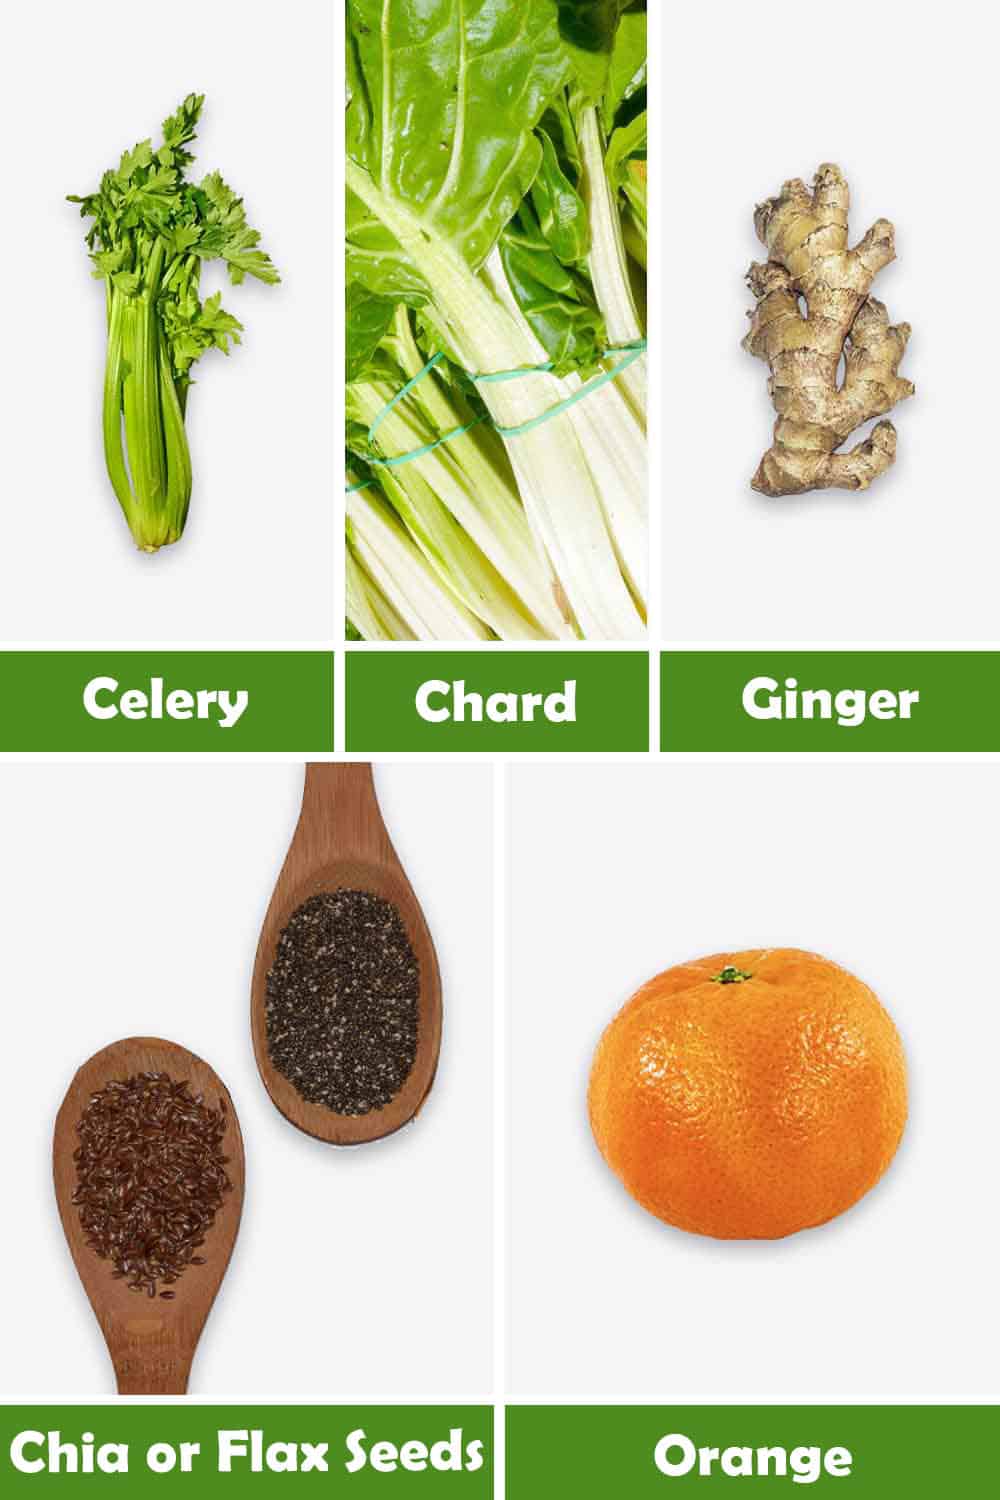 CELERY, CHARD, GINGER, ORANGE AND CHIA OR FLAX SEEDS